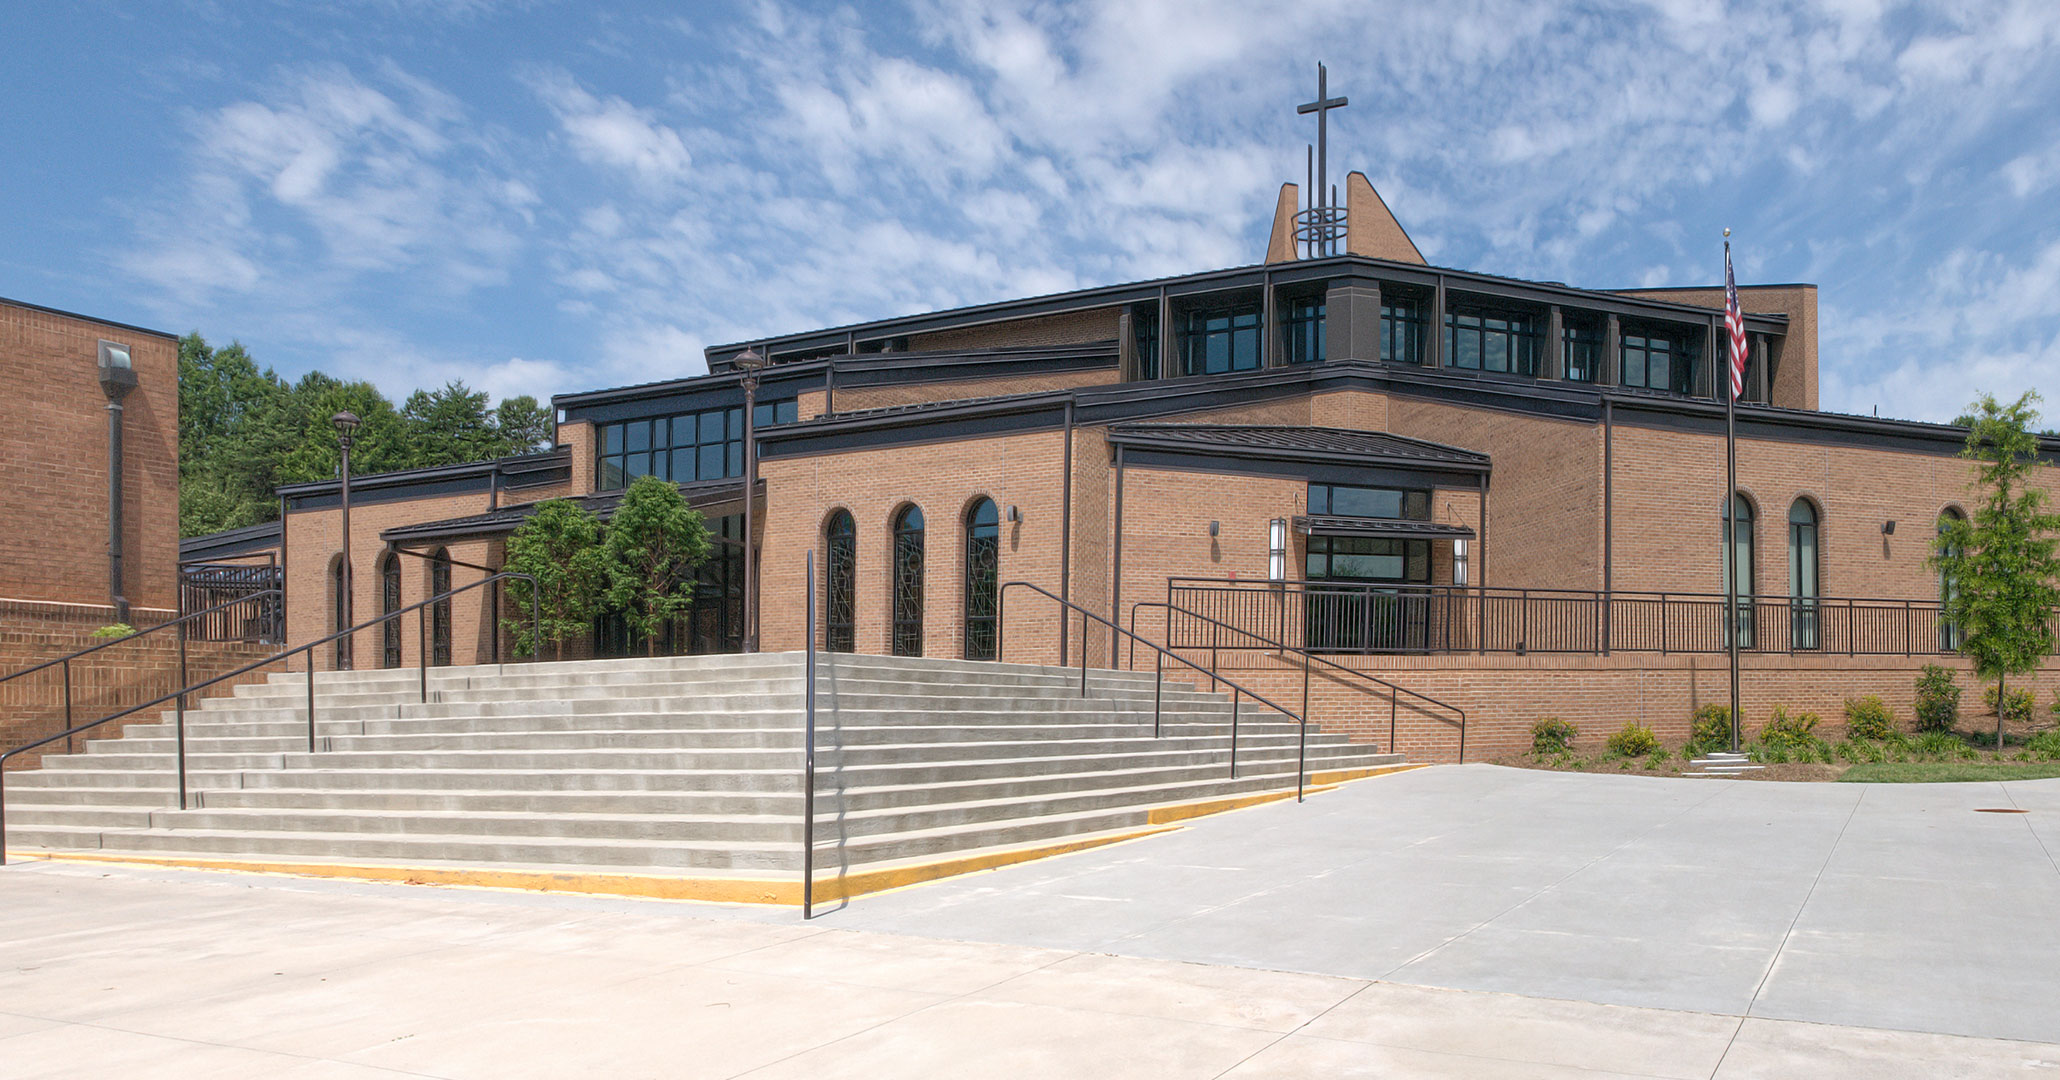 St. Therese worked with Boudreaux to design the new church in Moorseville, NC.